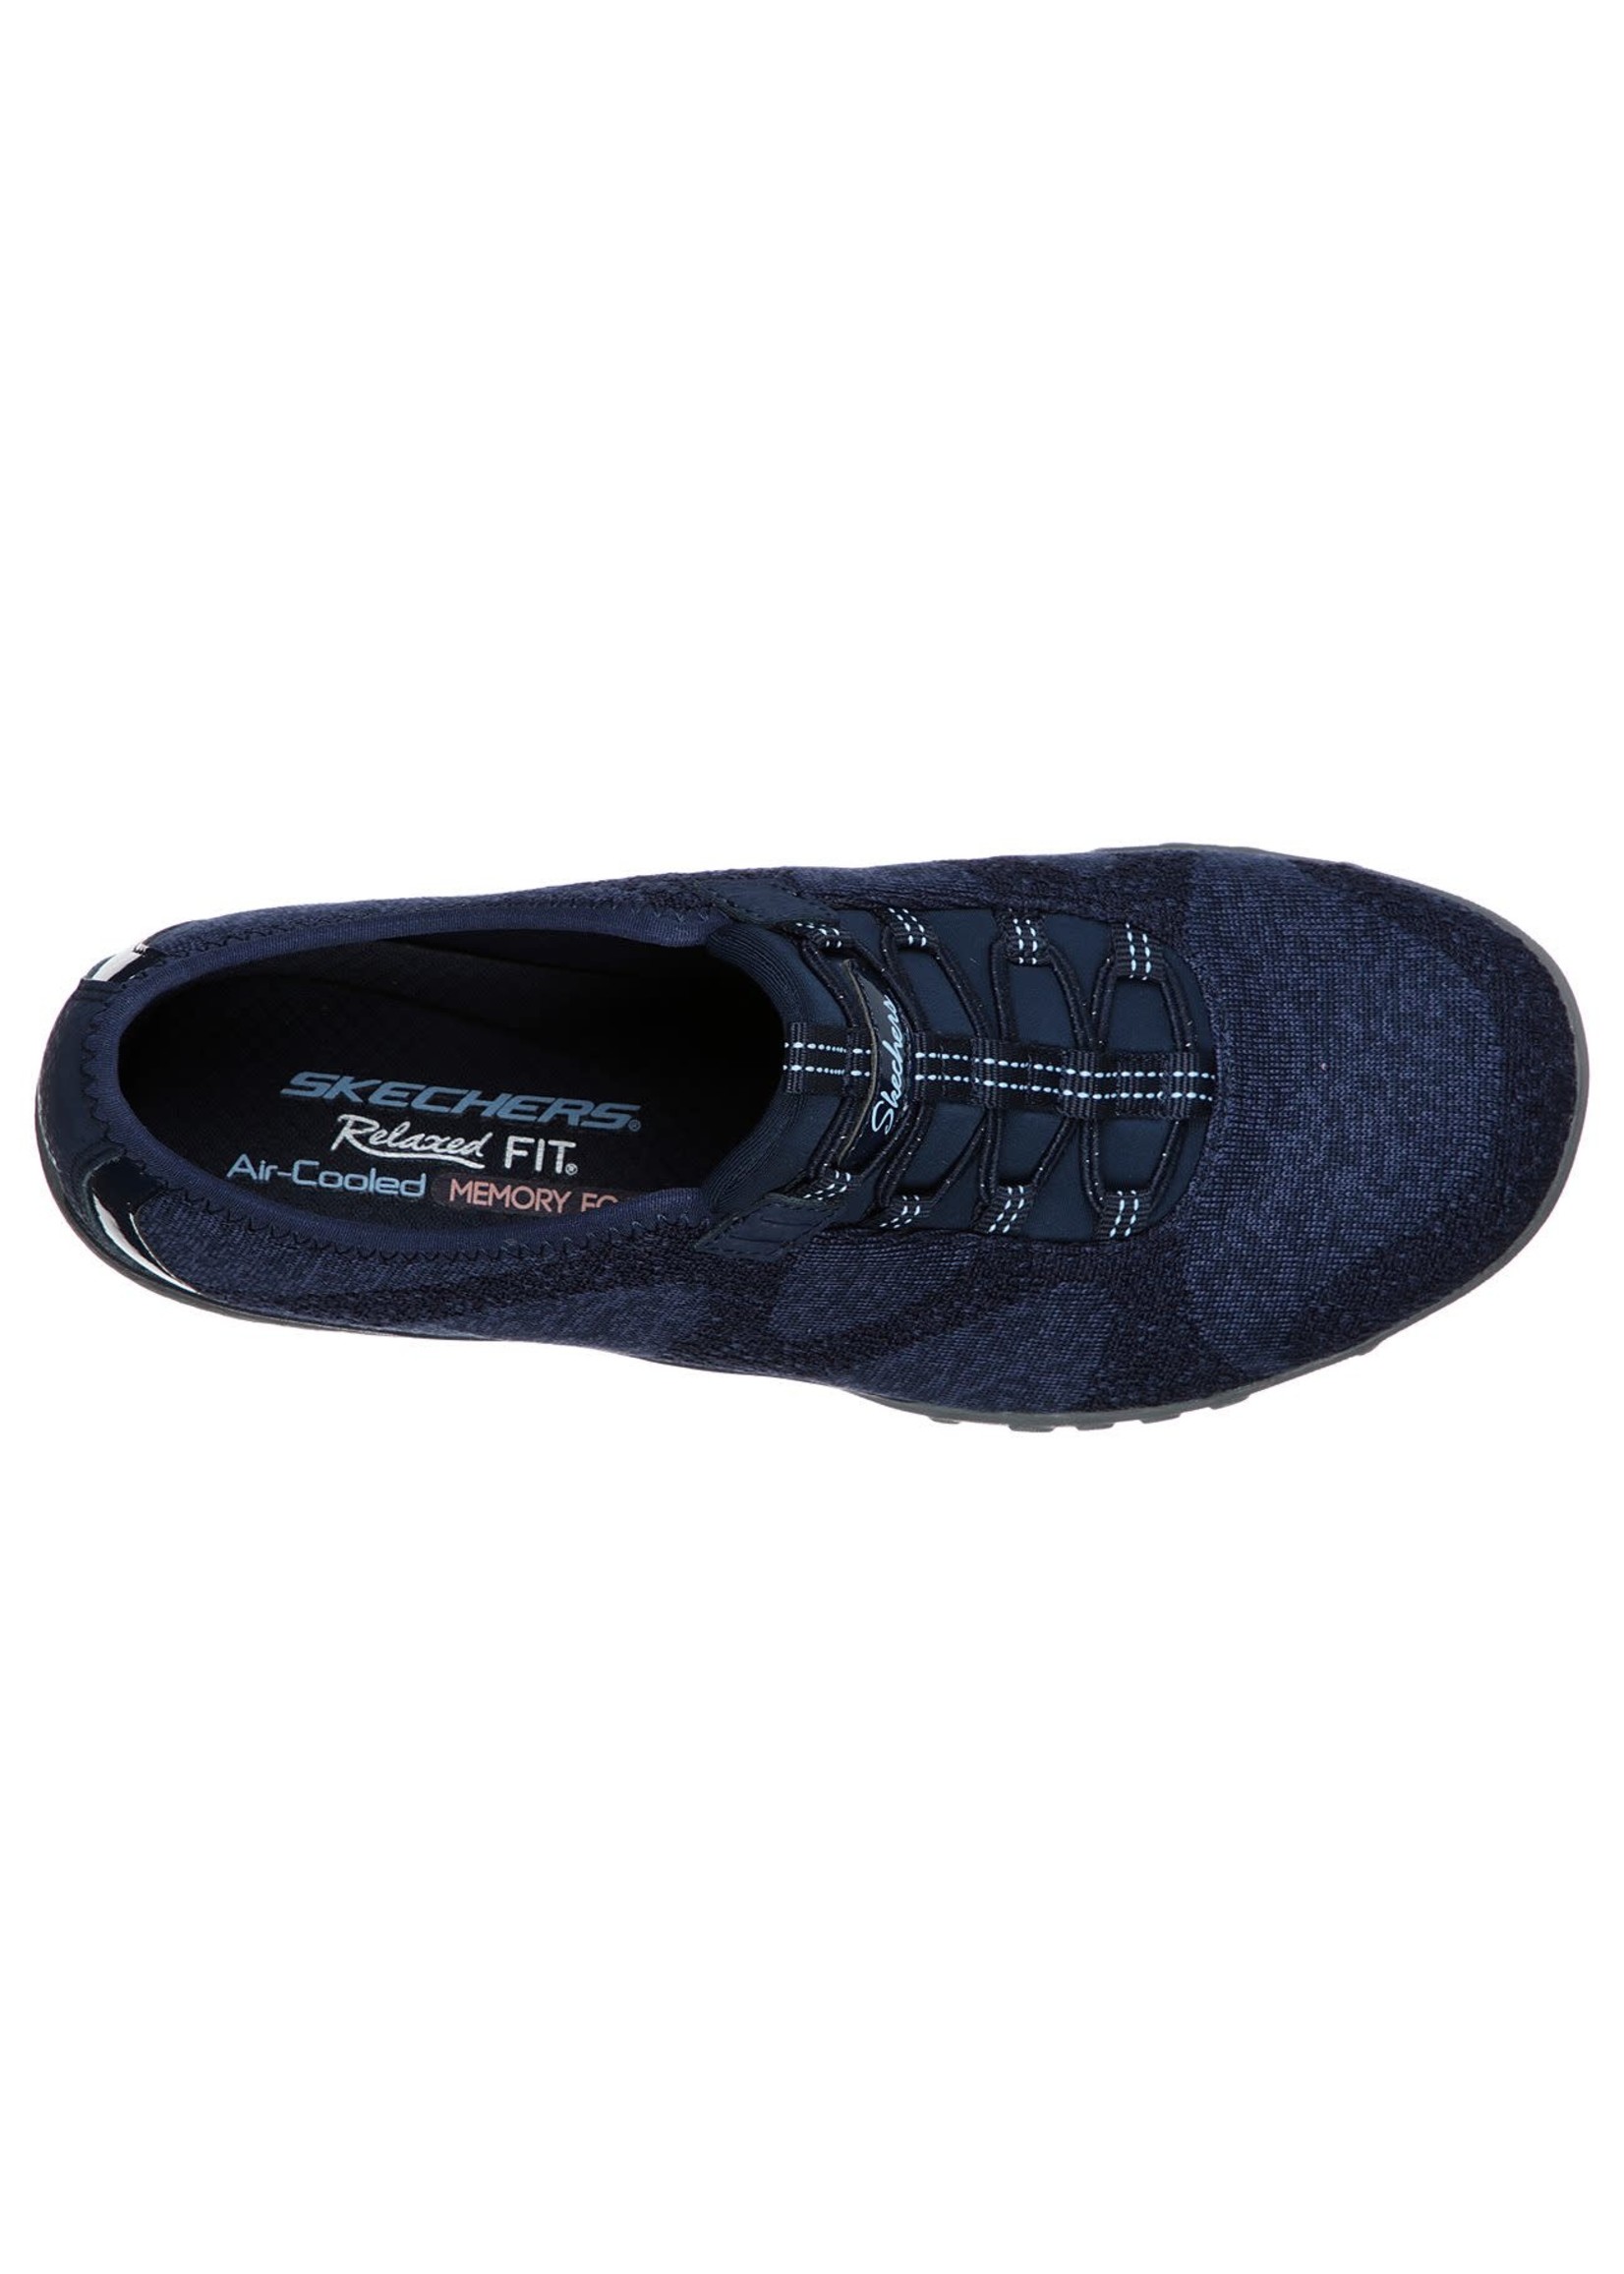 relaxed fit breathe easy skechers